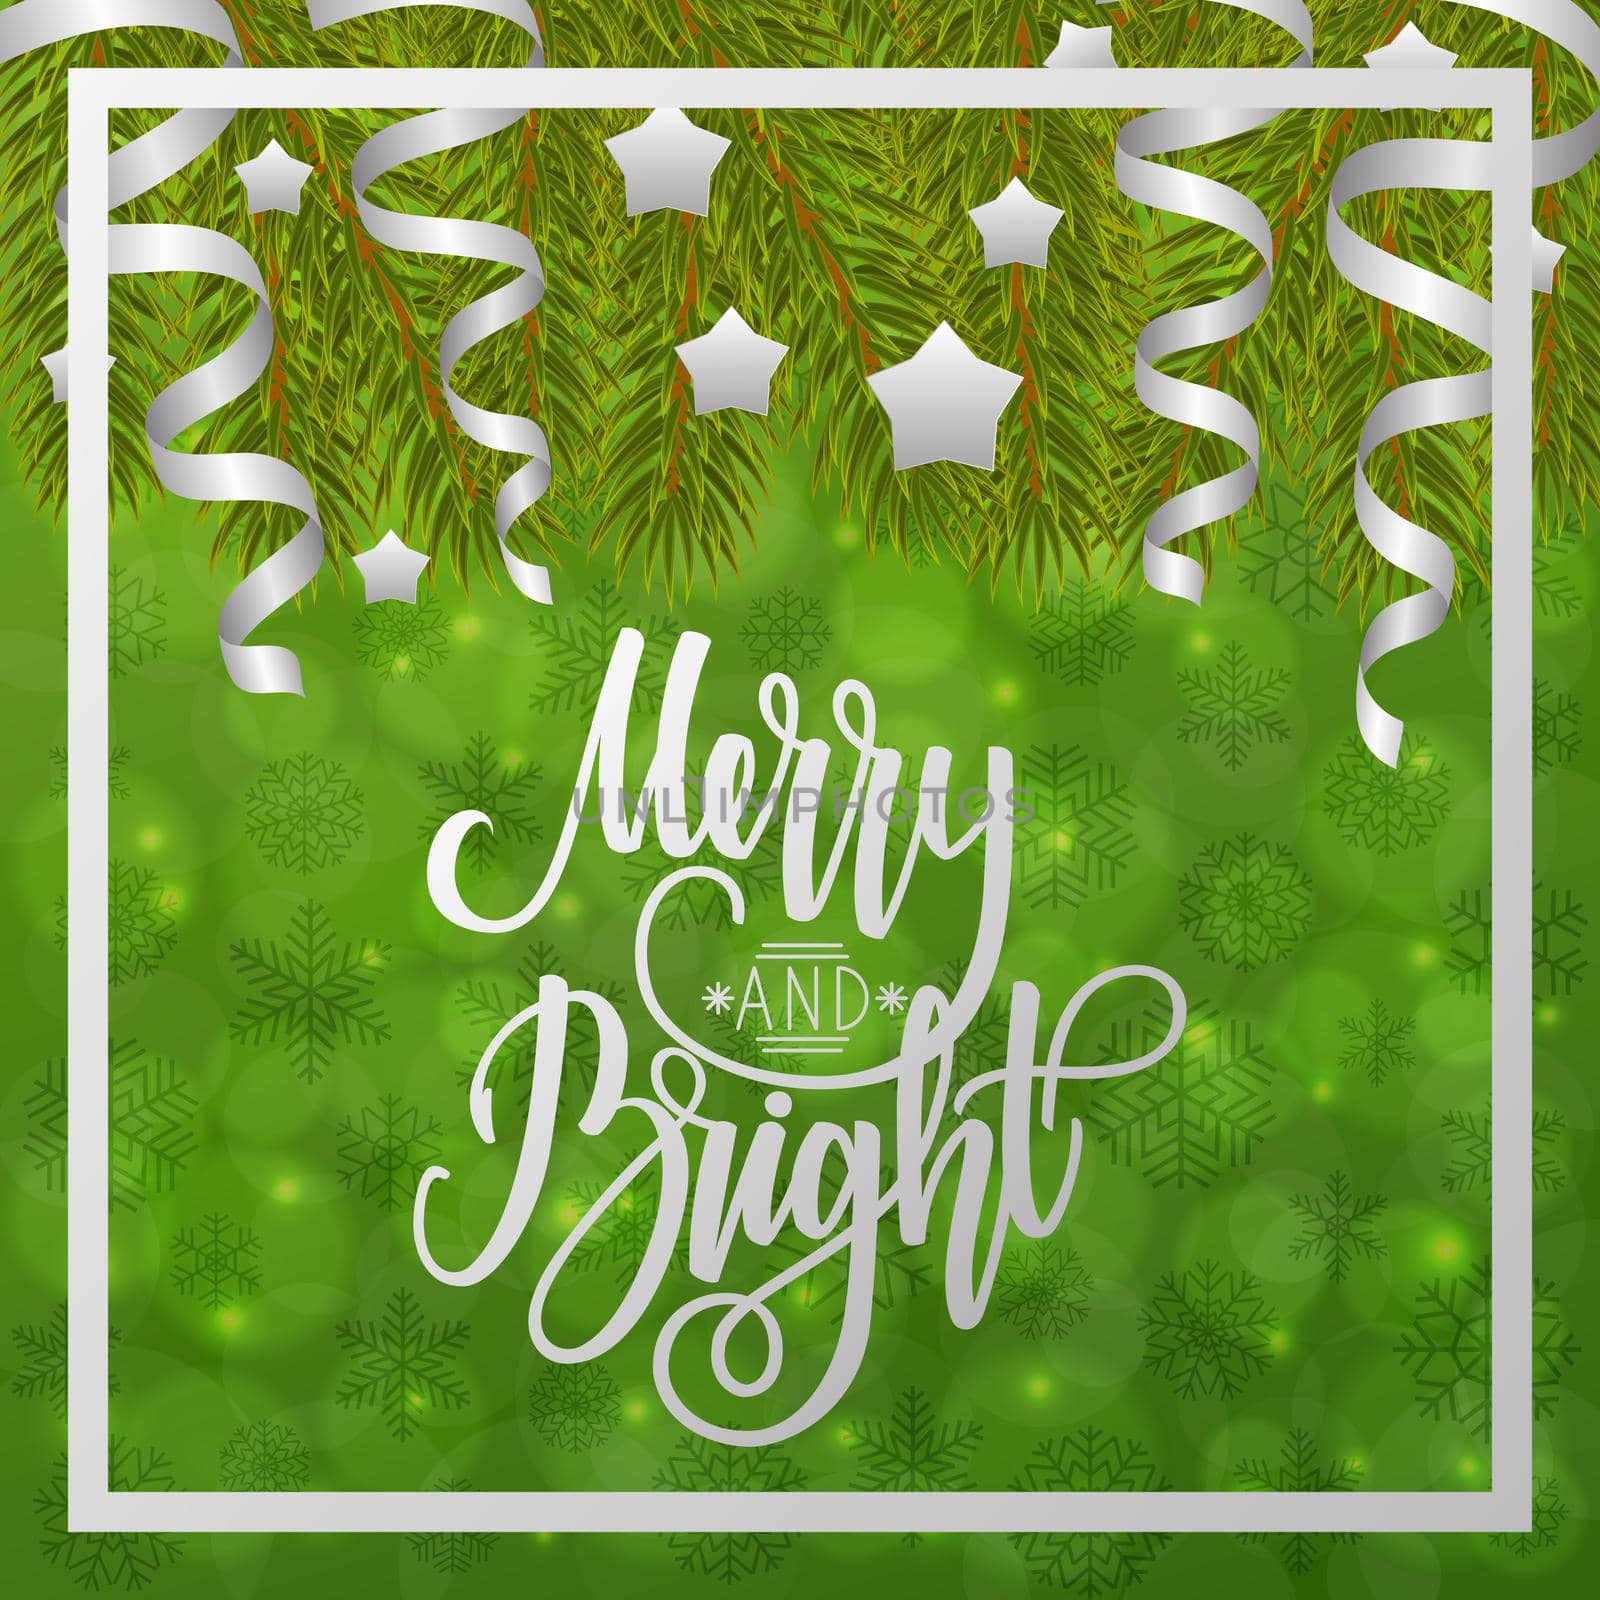 Merry and bright. Handwritten lettering on blurred bokeh background with fir branches. illustrations for greeting cards, invitations, posters, web banners and much more.